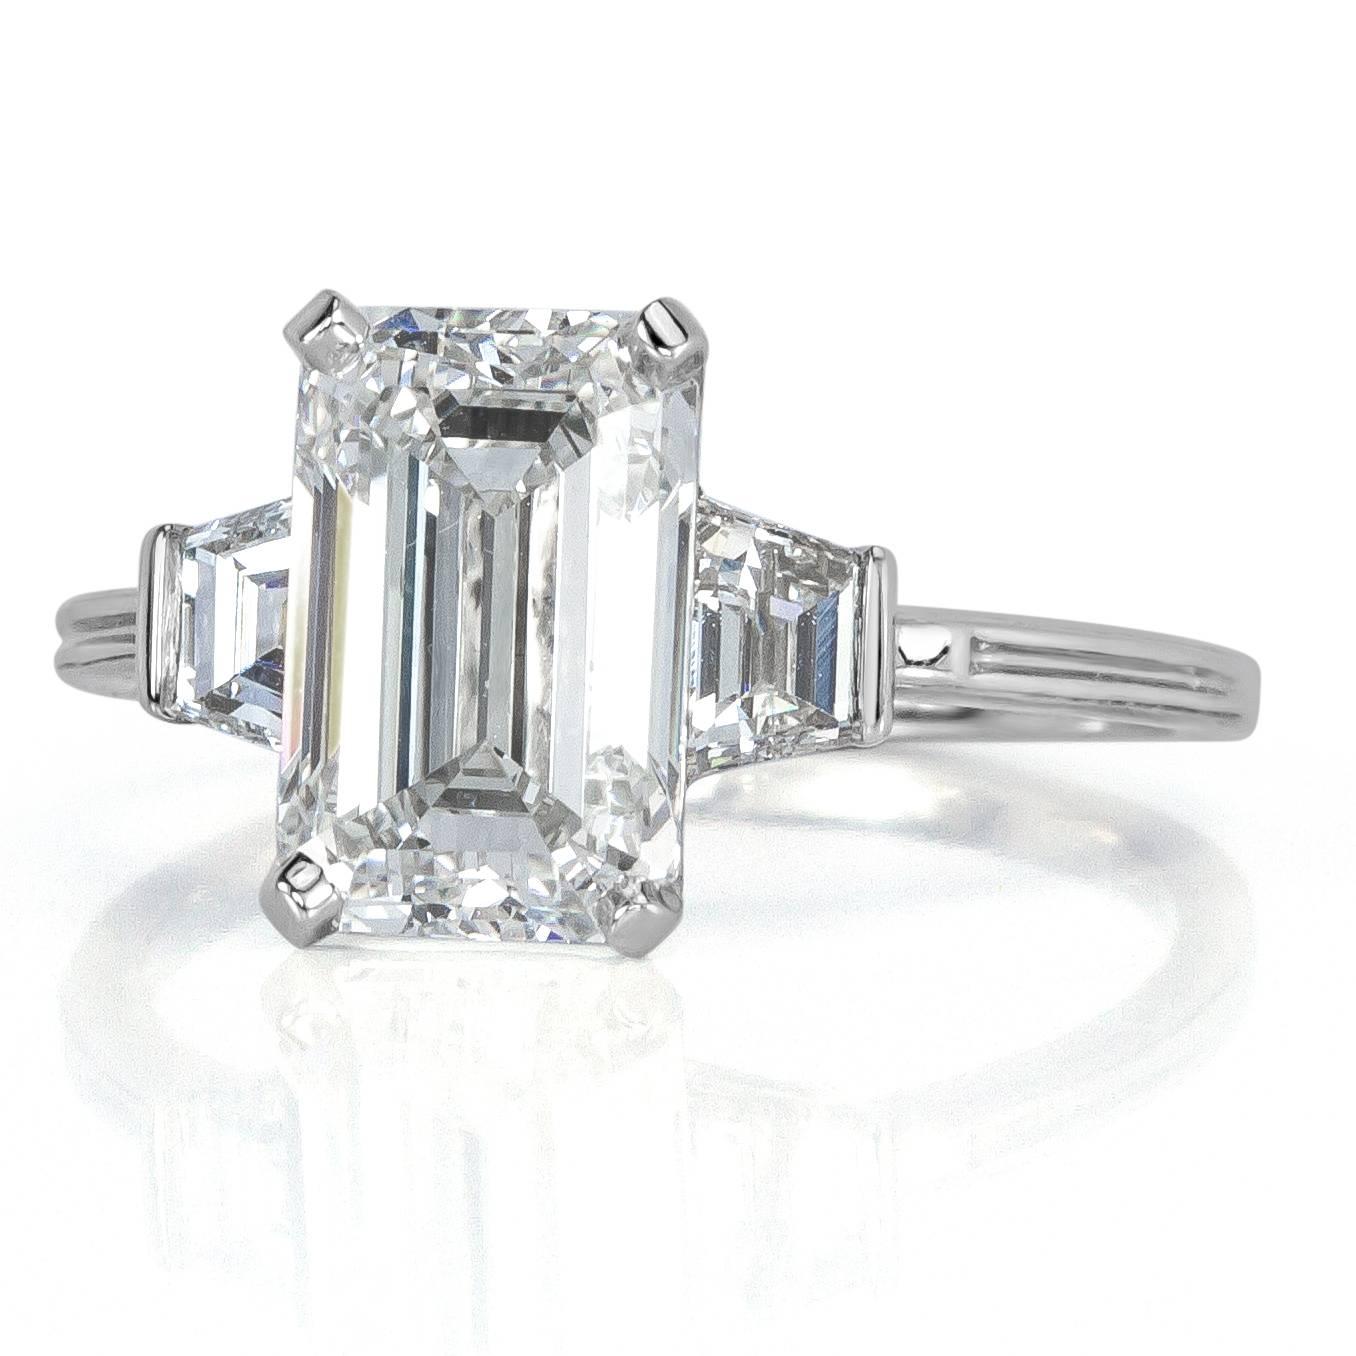 This gorgeous emerald cut diamond ring is a masterpiece. It showcases a stunning 3.02ct emerald cut diamond, GIA certified at H-VVS2. It is incredibly white and clear with an exceptionally elongated cut measuring 10.03 x 6.51 mm. It is beautifully